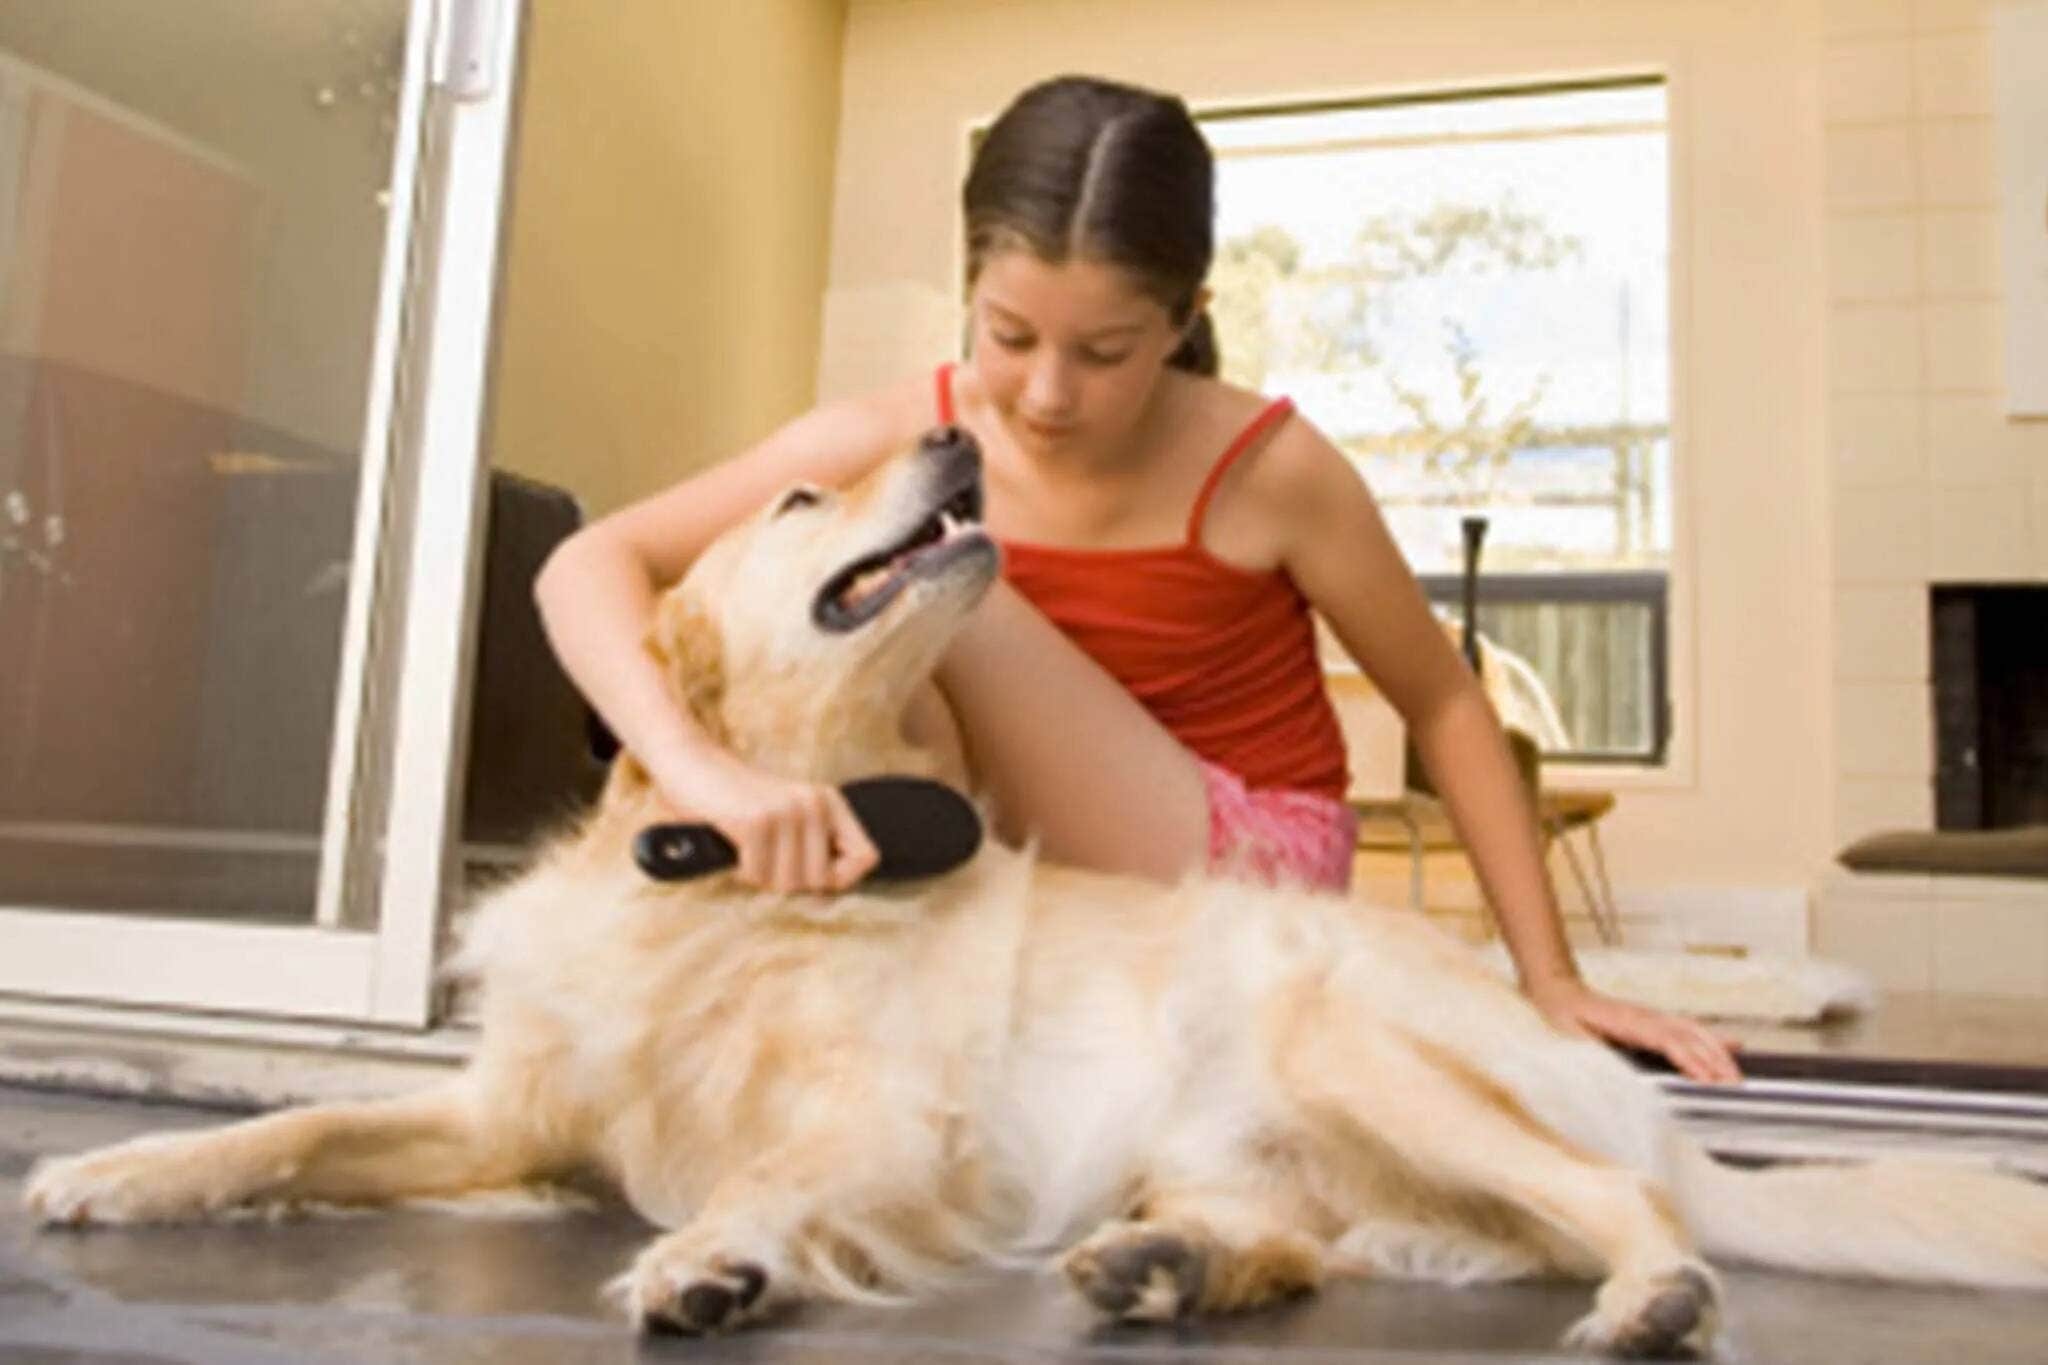 A girl brushing her dog's fur to remove mats or tangles.